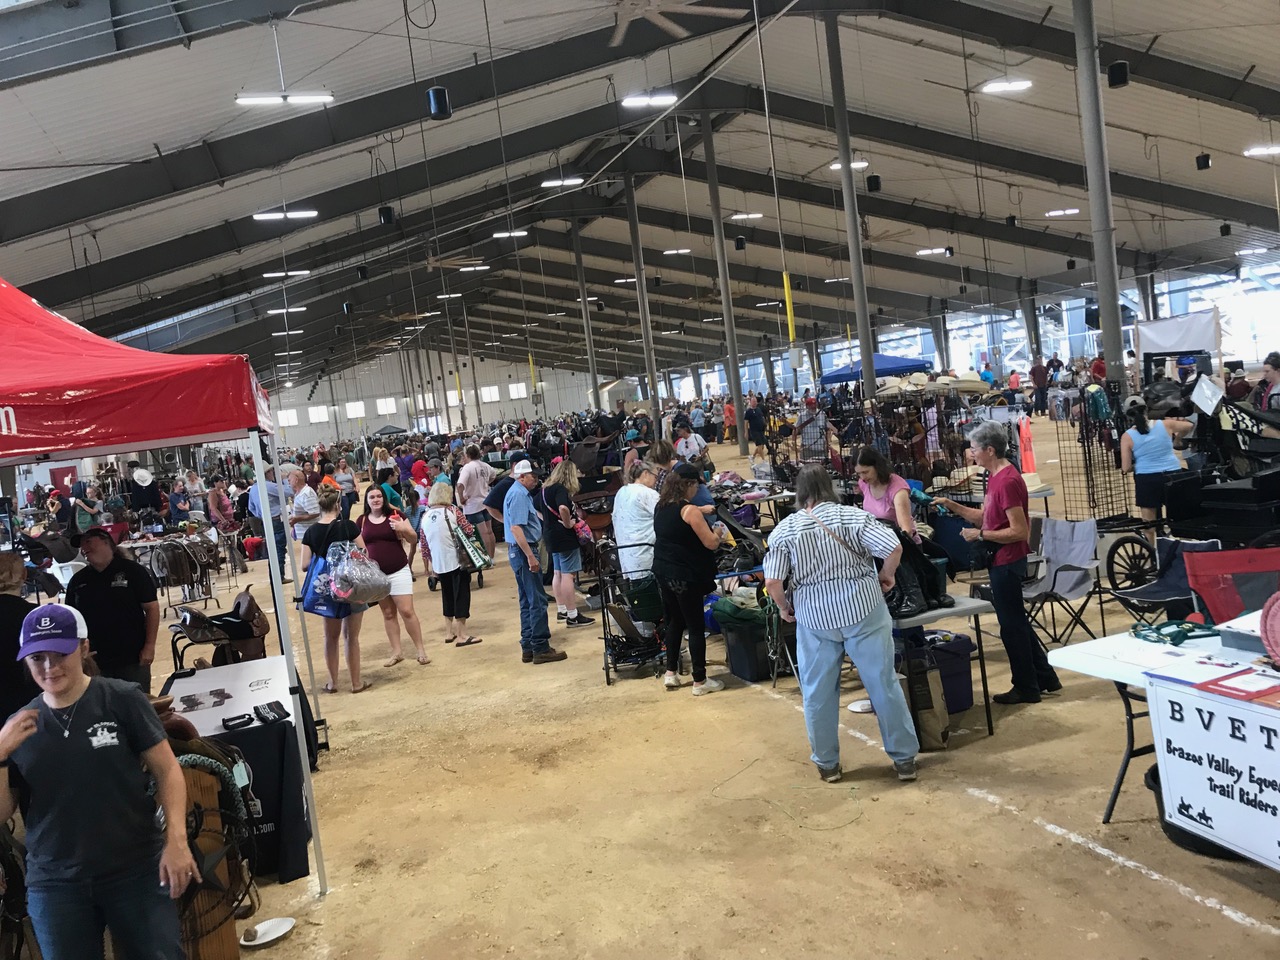 The Brazos Valley Driving and Riding Club hosts an annual Horseman's Market Day.